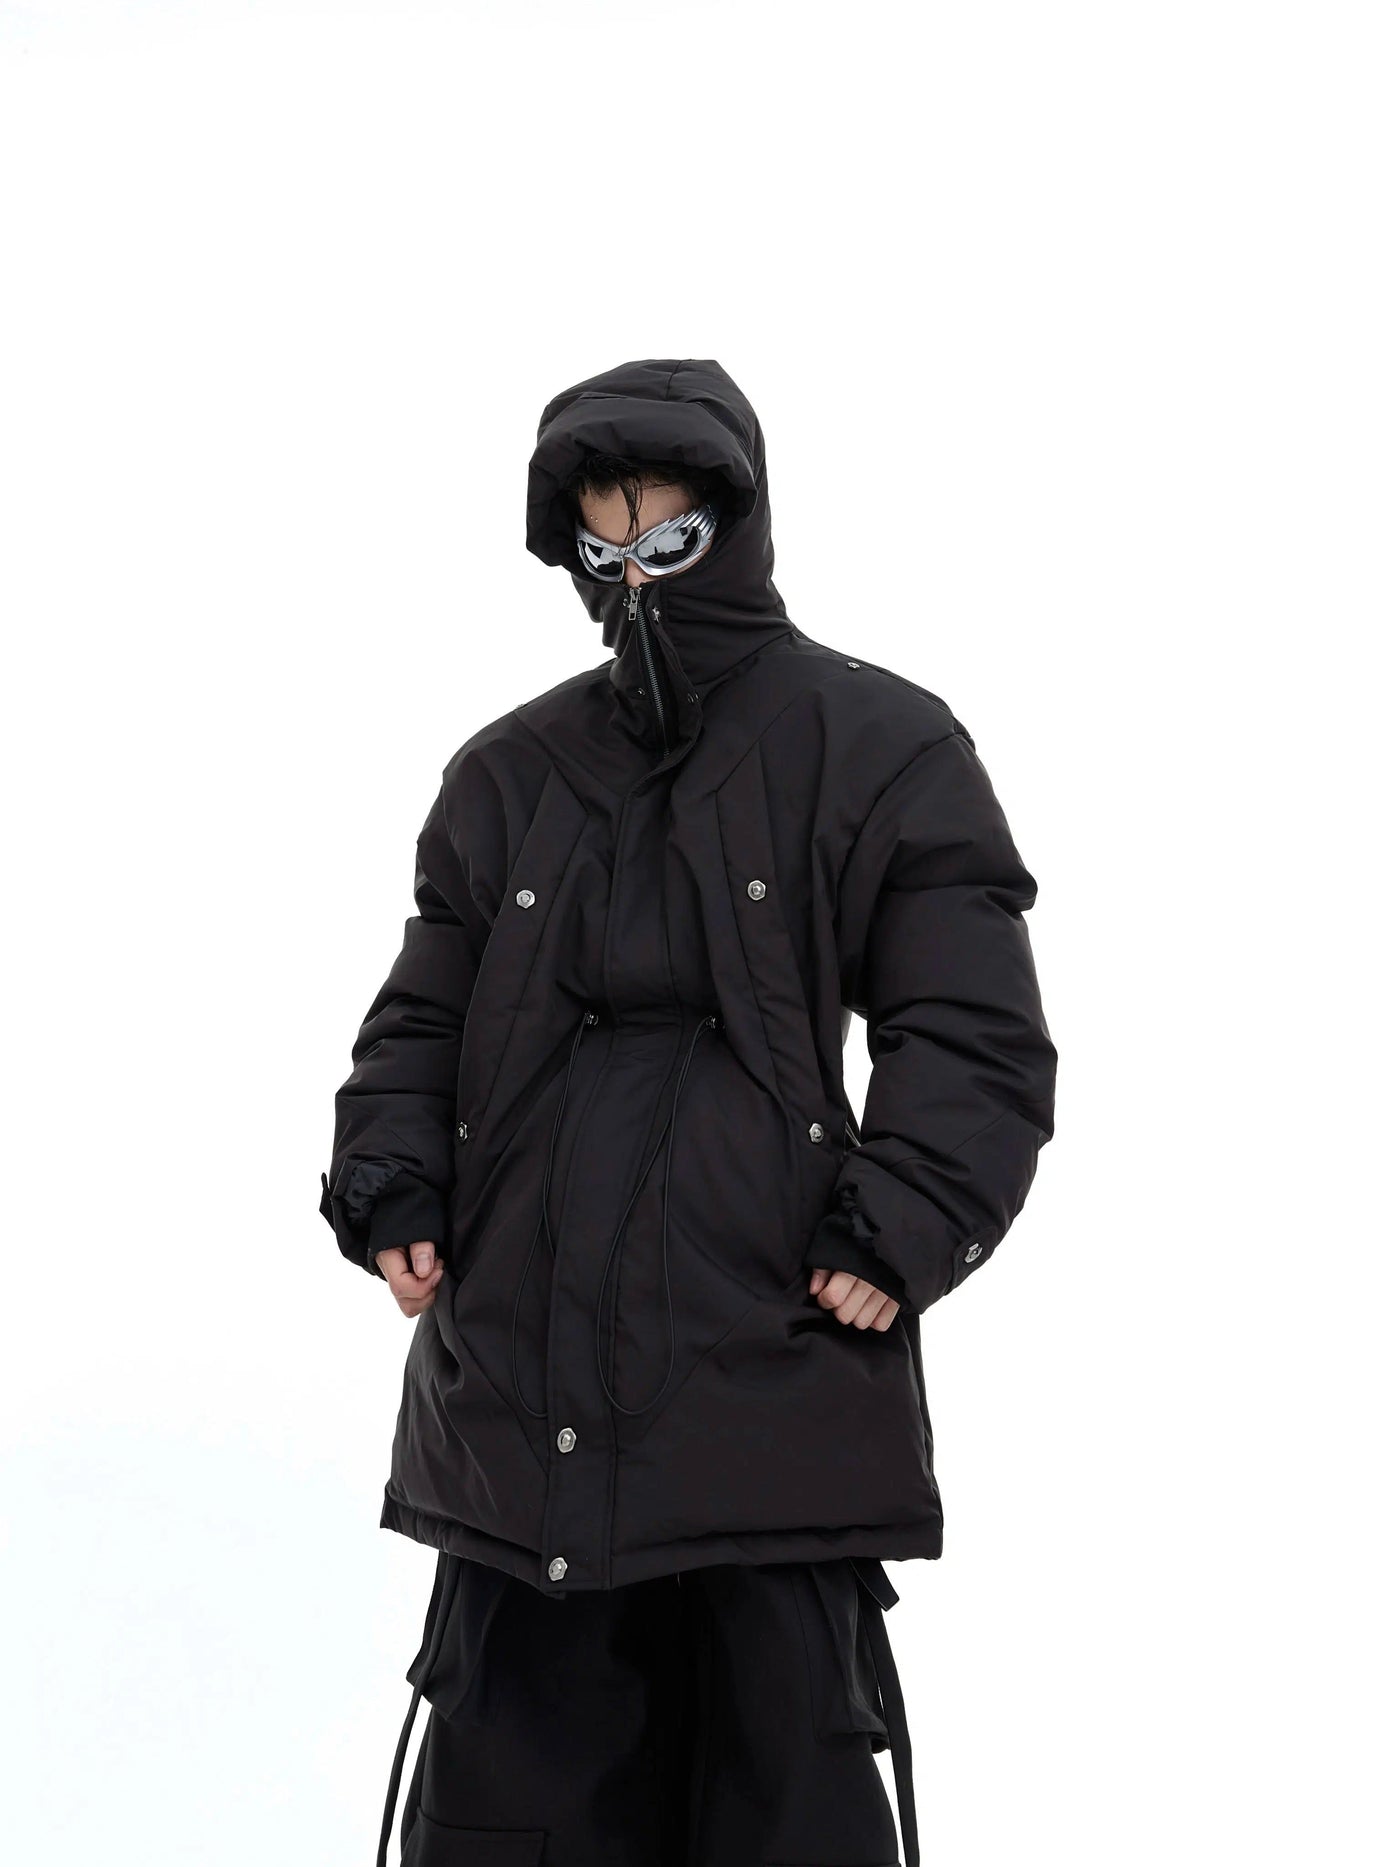 Hooded Long Puffer Jacket Korean Street Fashion Jacket By Argue Culture Shop Online at OH Vault